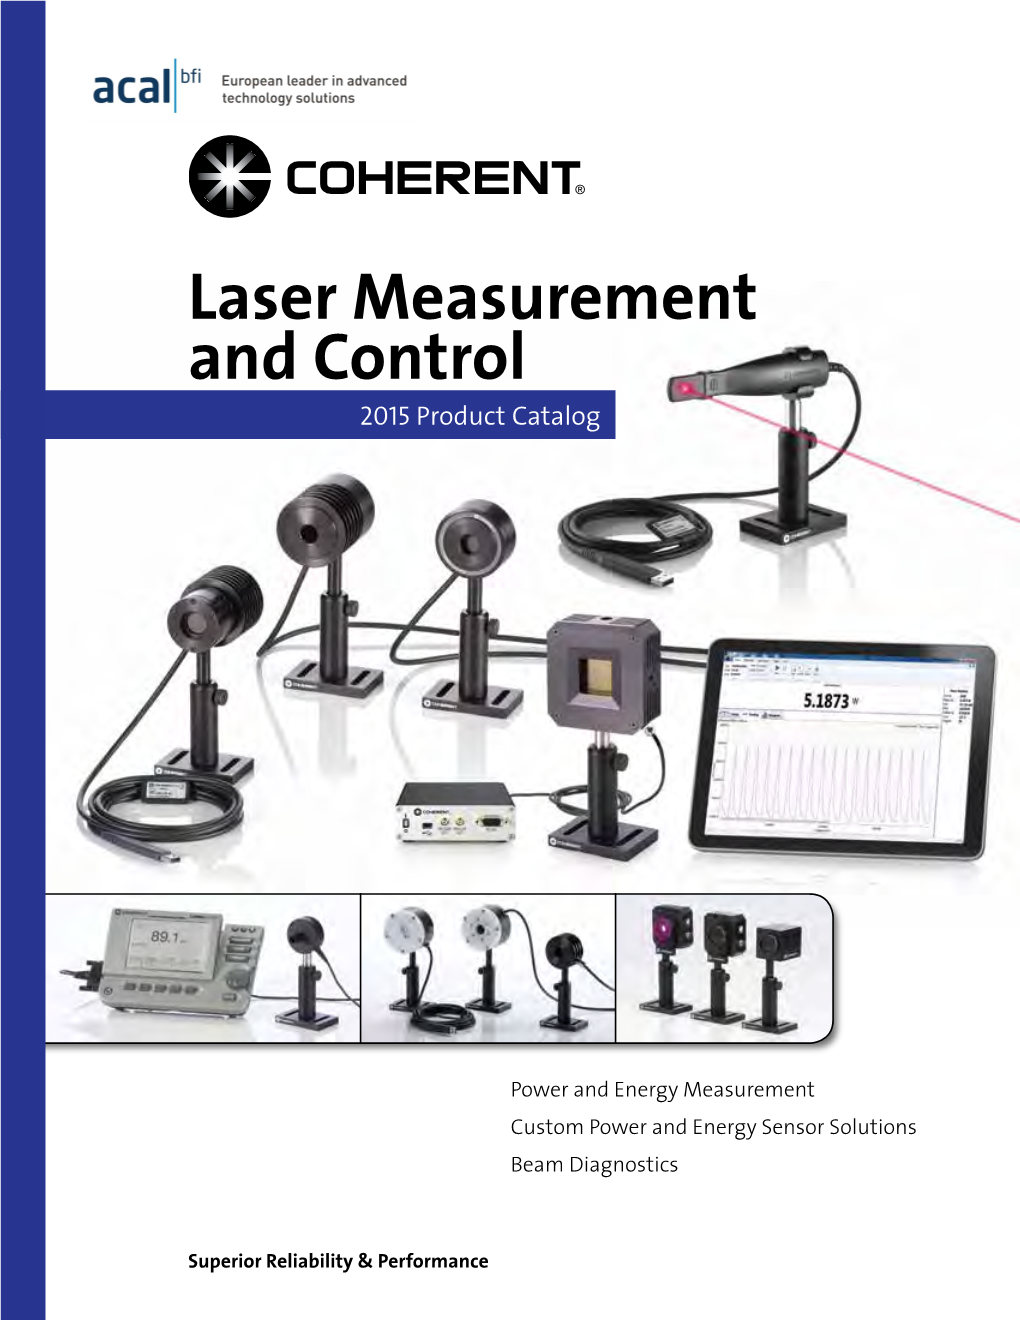 Laser Measurement and Control 2015 Product Catalog